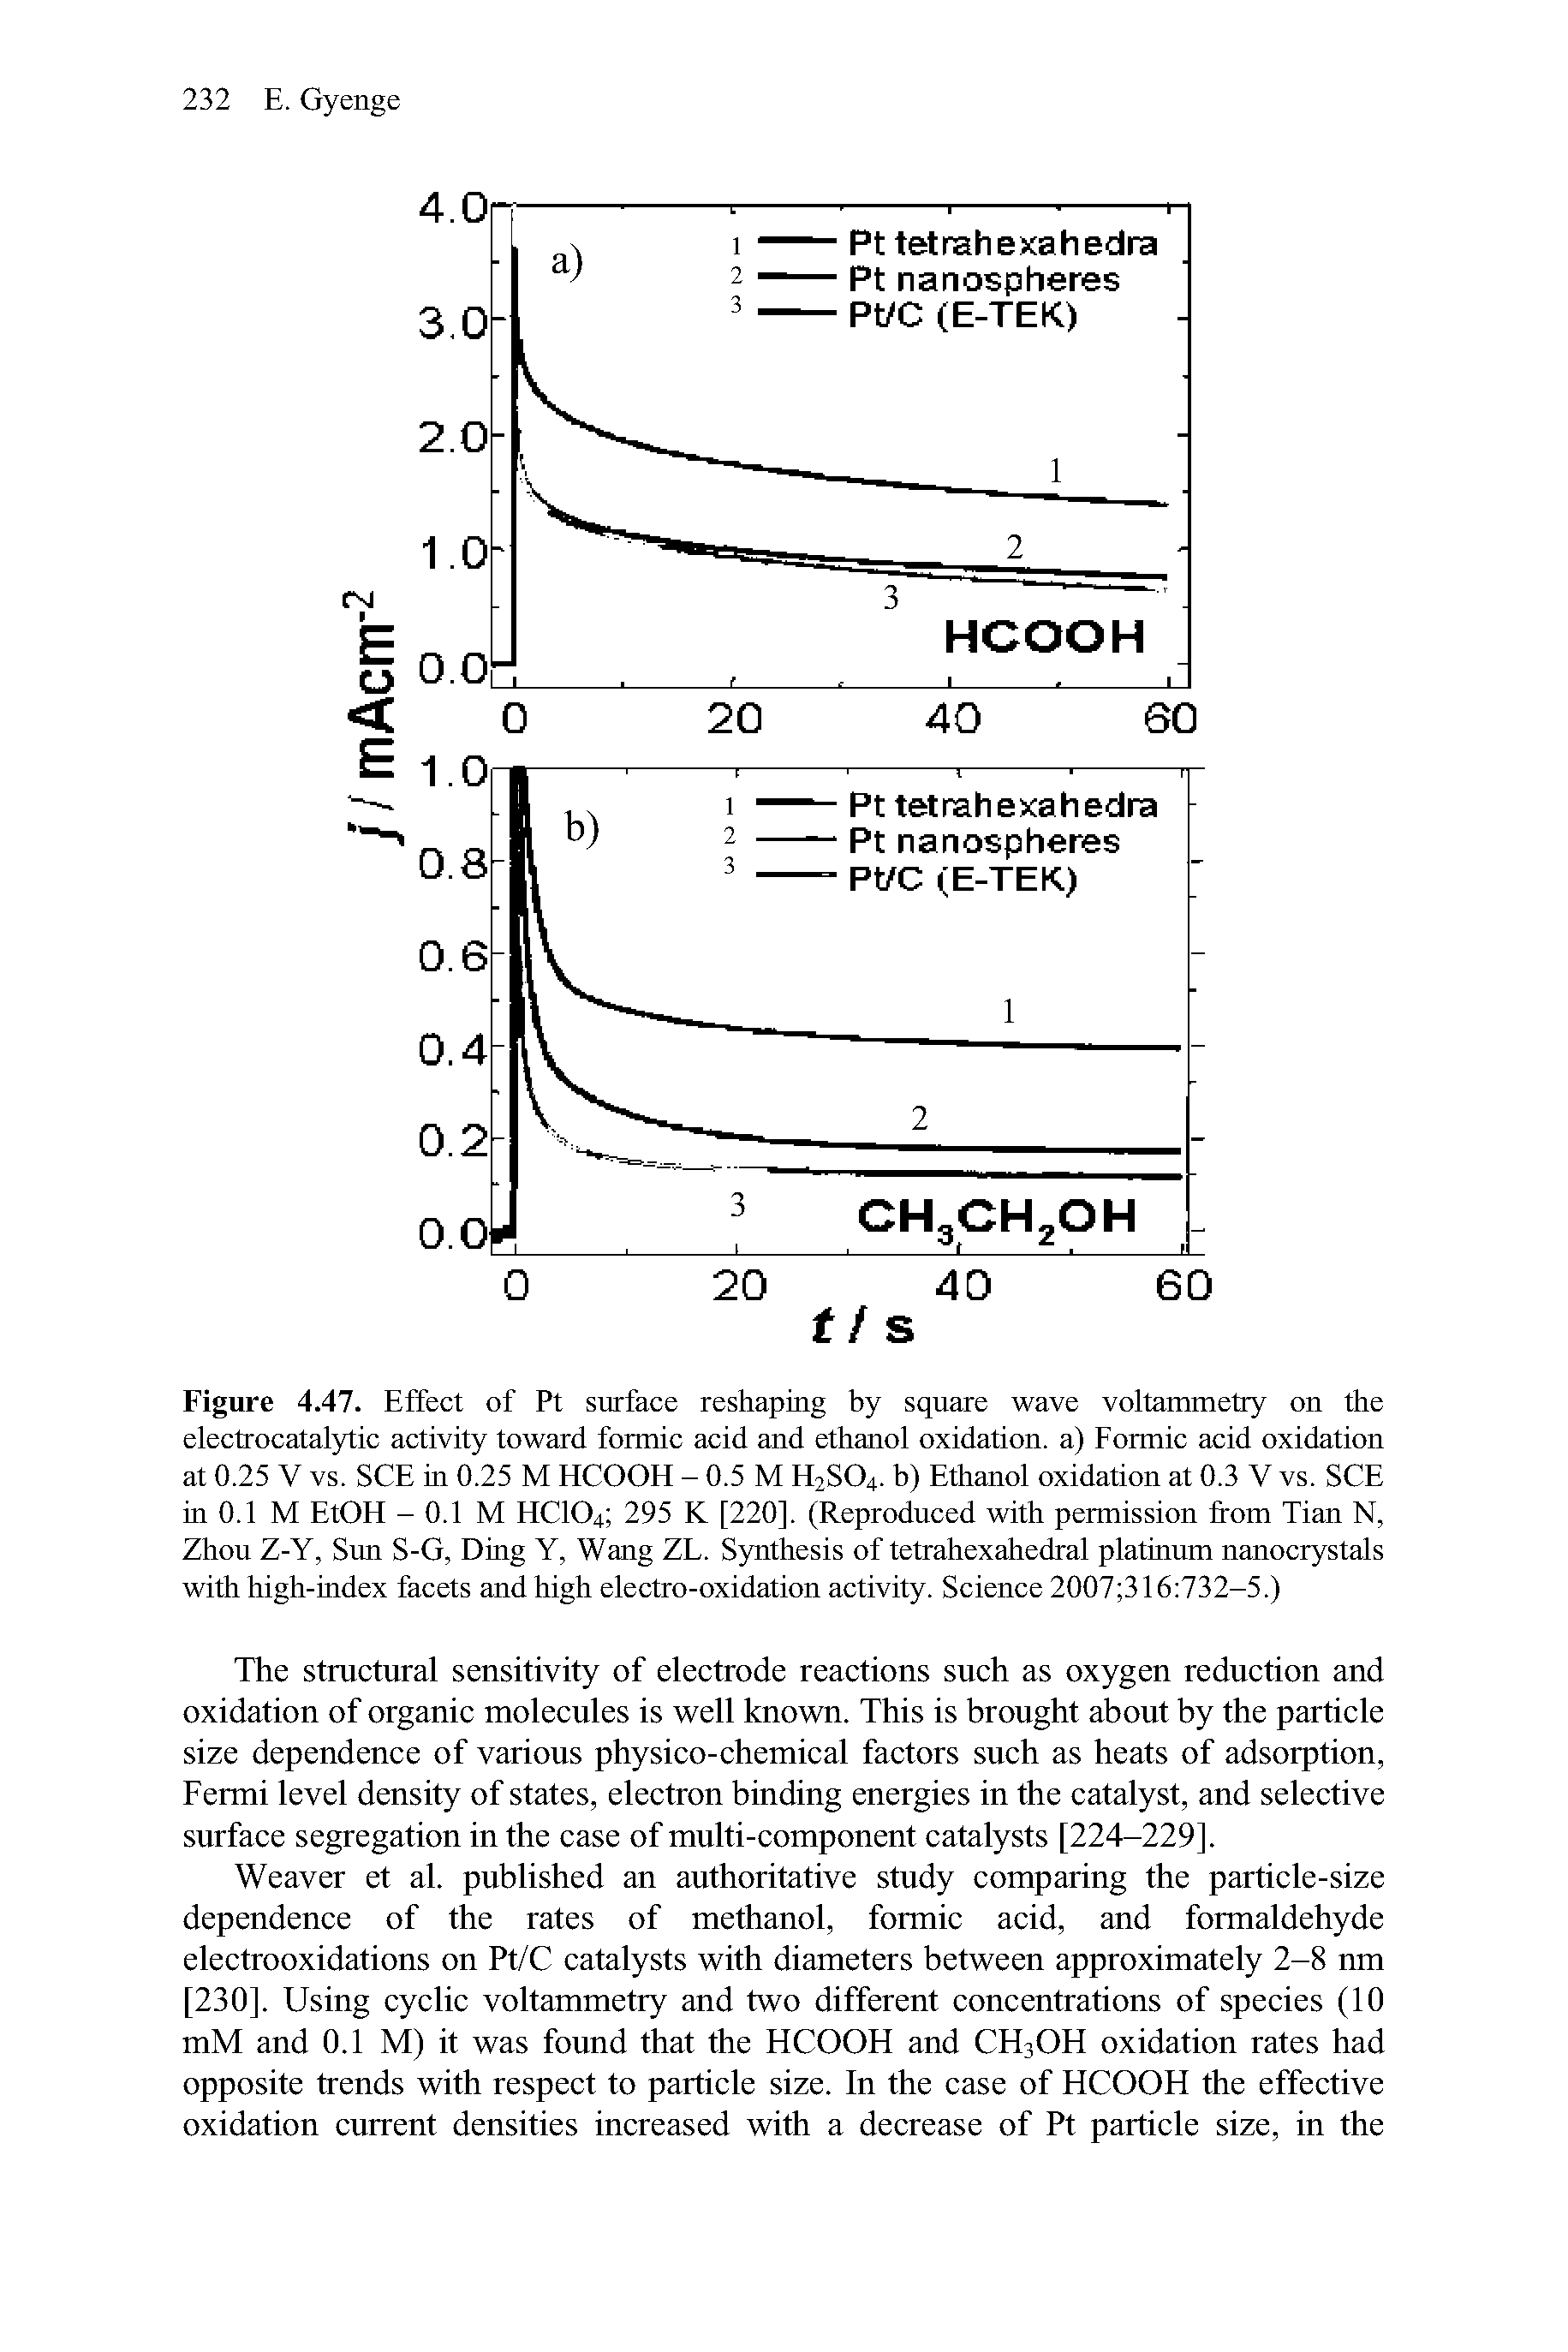 Figure 4.47. Effect of Pt surface reshaping by square wave voltammetry on the electrocatalytic activity toward formic acid and ethanol oxidation, a) Formic acid oxidation at 0.25 V vs. SCE in 0.25 M HCOOH - 0.5 M H2SO4. b) Ethanol oxidation at 0.3 V vs. SCE in 0.1 M EtOFl - 0.1 M F1C104 295 K [220]. (Reproduced with permission from Tian N, Zhou Z-Y, Sun S-G, Ding Y, Wang ZL. Synthesis of tetrahexahedral platinum nanocrystals with high-index facets and high electro-oxidation activity. Science 2007 316 732-5.)...